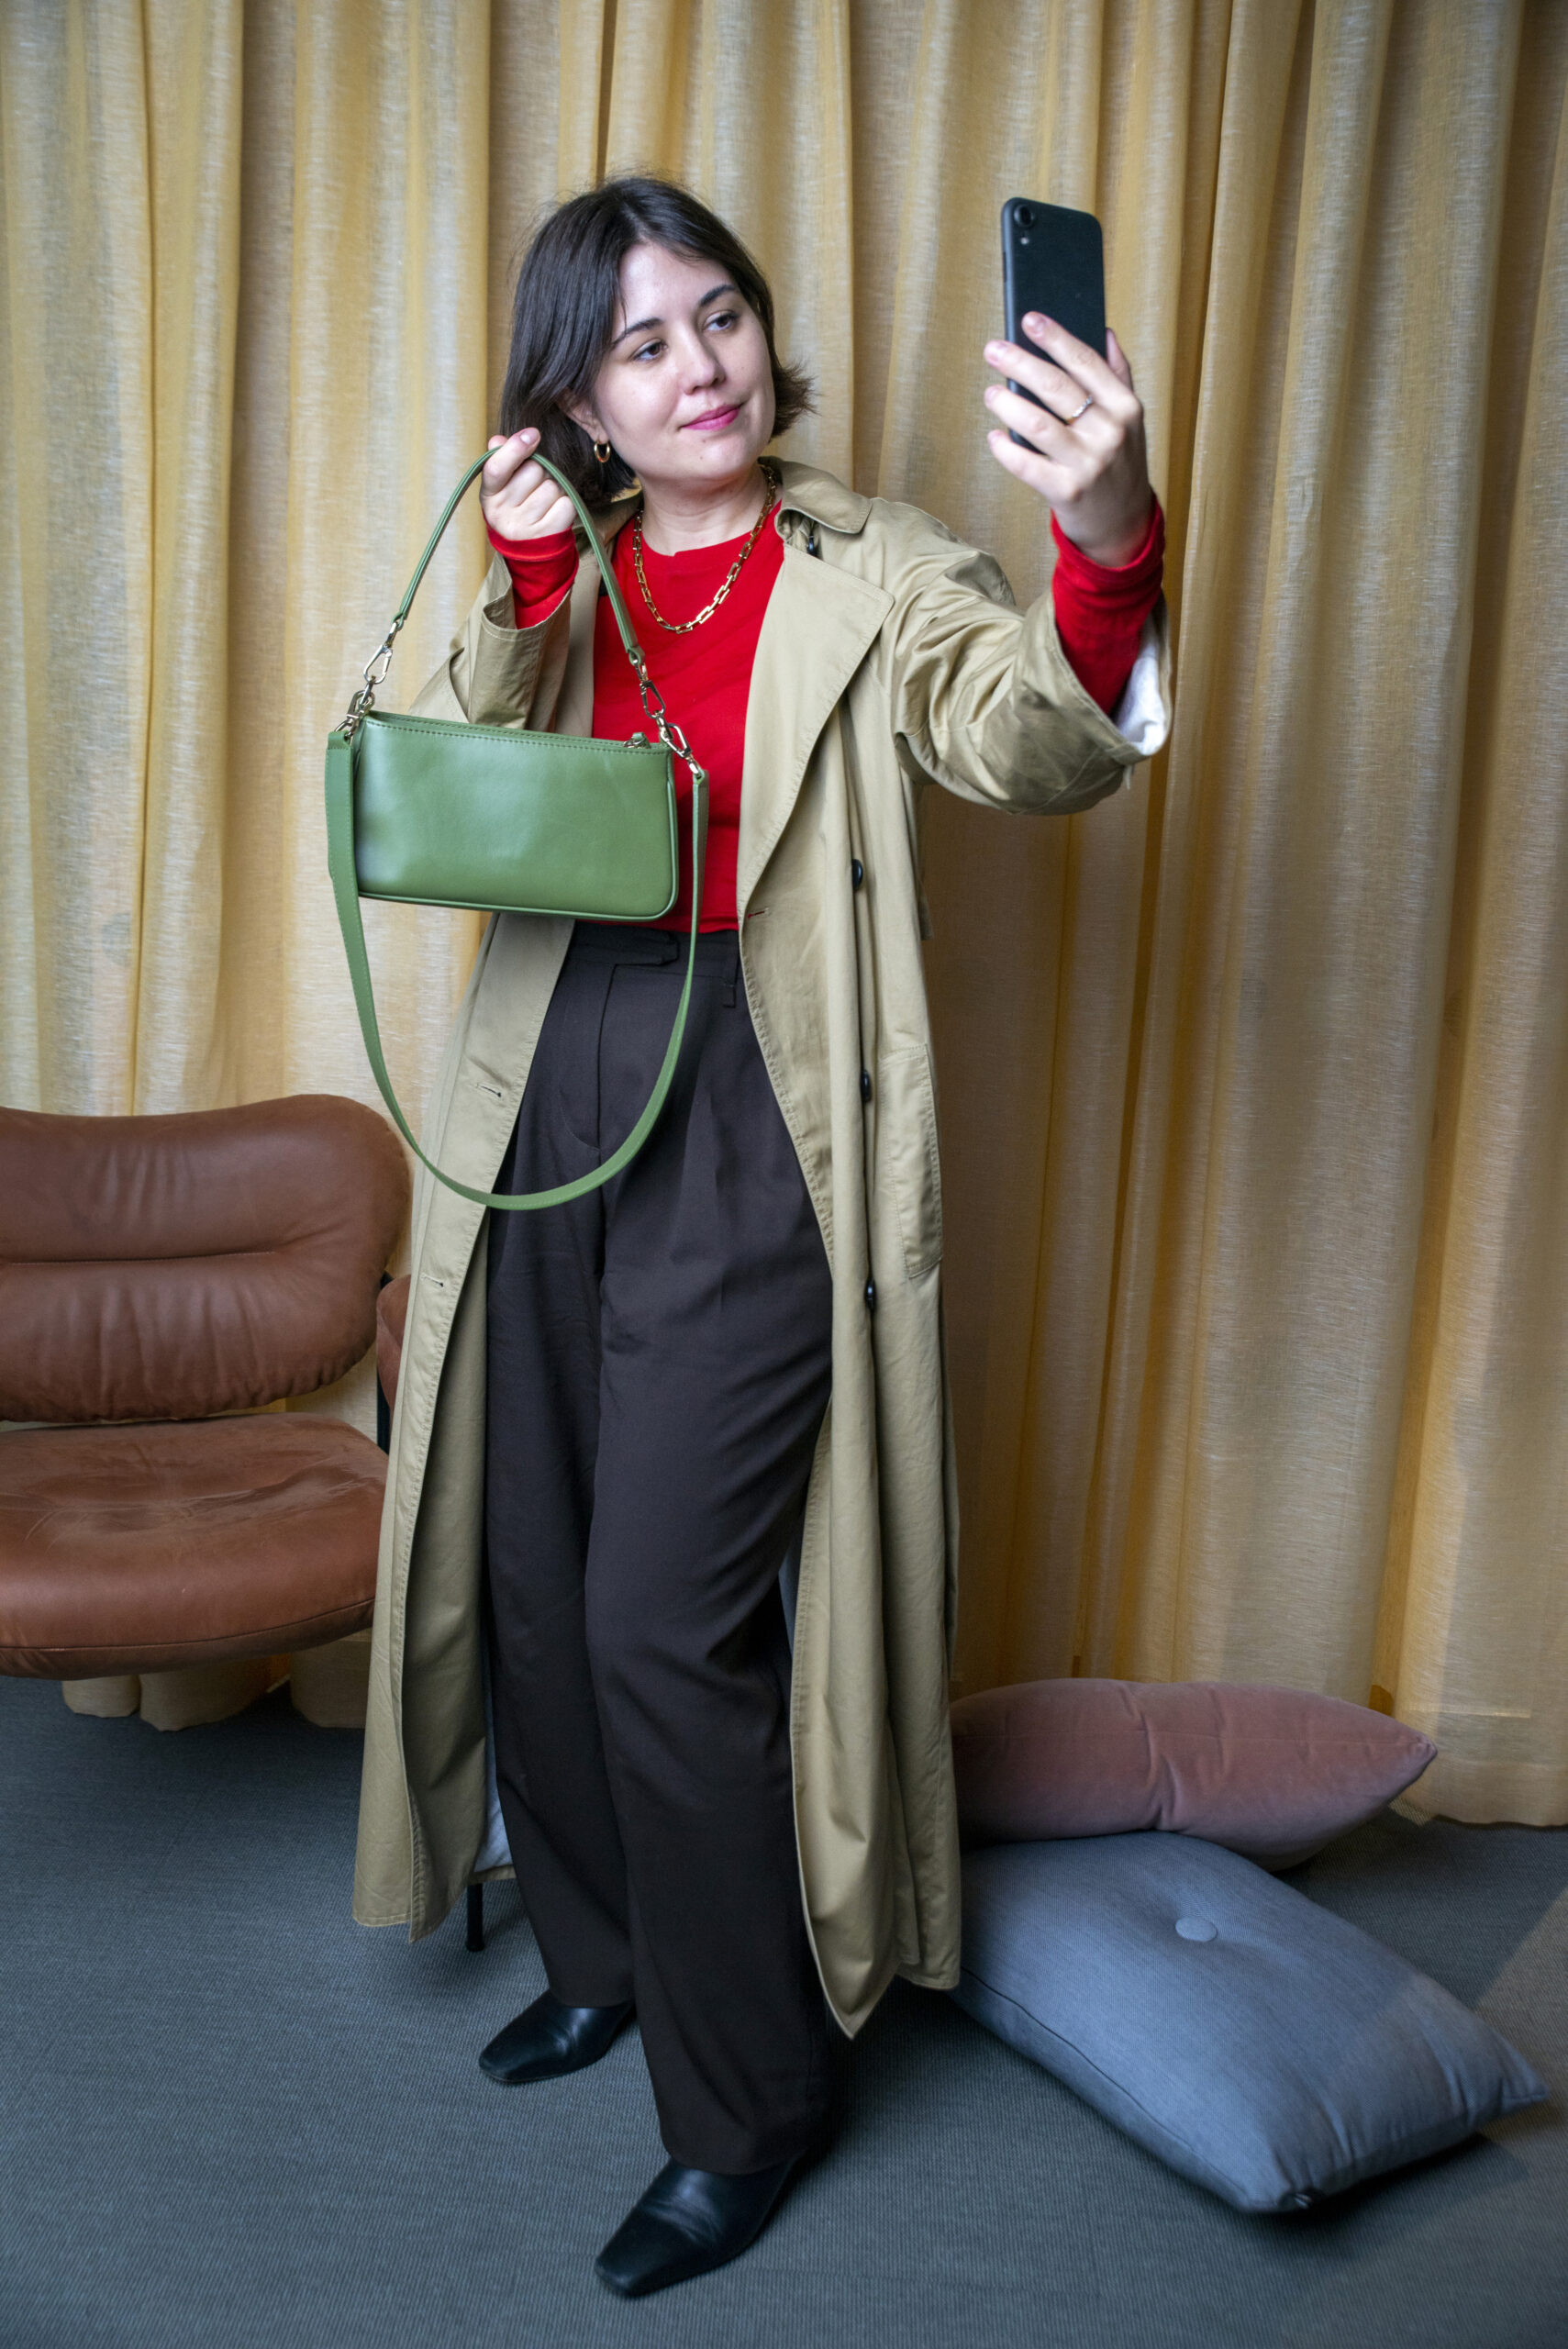 A woman in fashionable clothing taking a selfie.